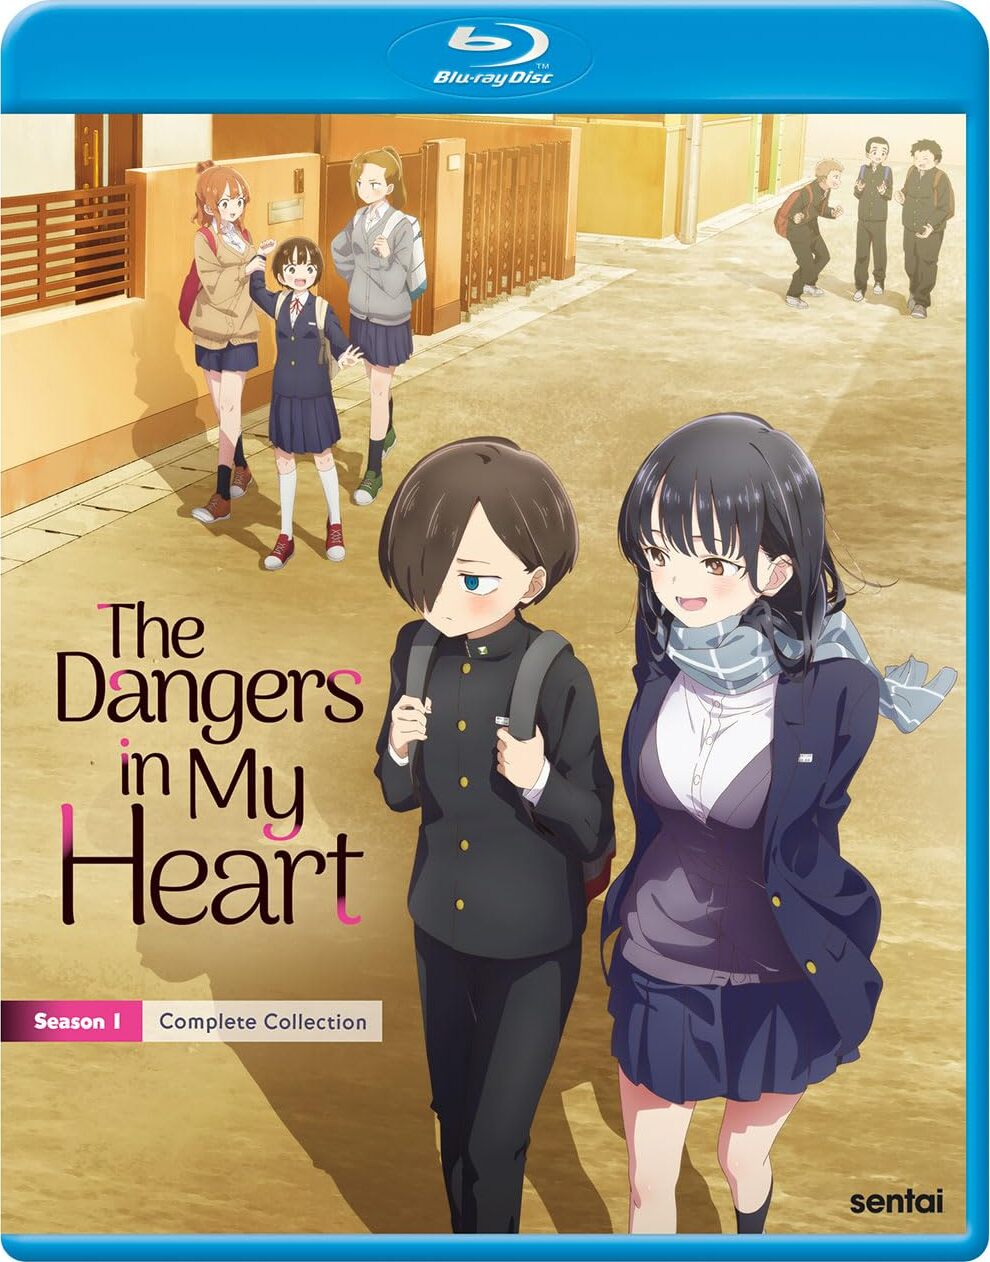 The Dangers in My Heart: Season 1 Complete Collection Blu-ray (僕 